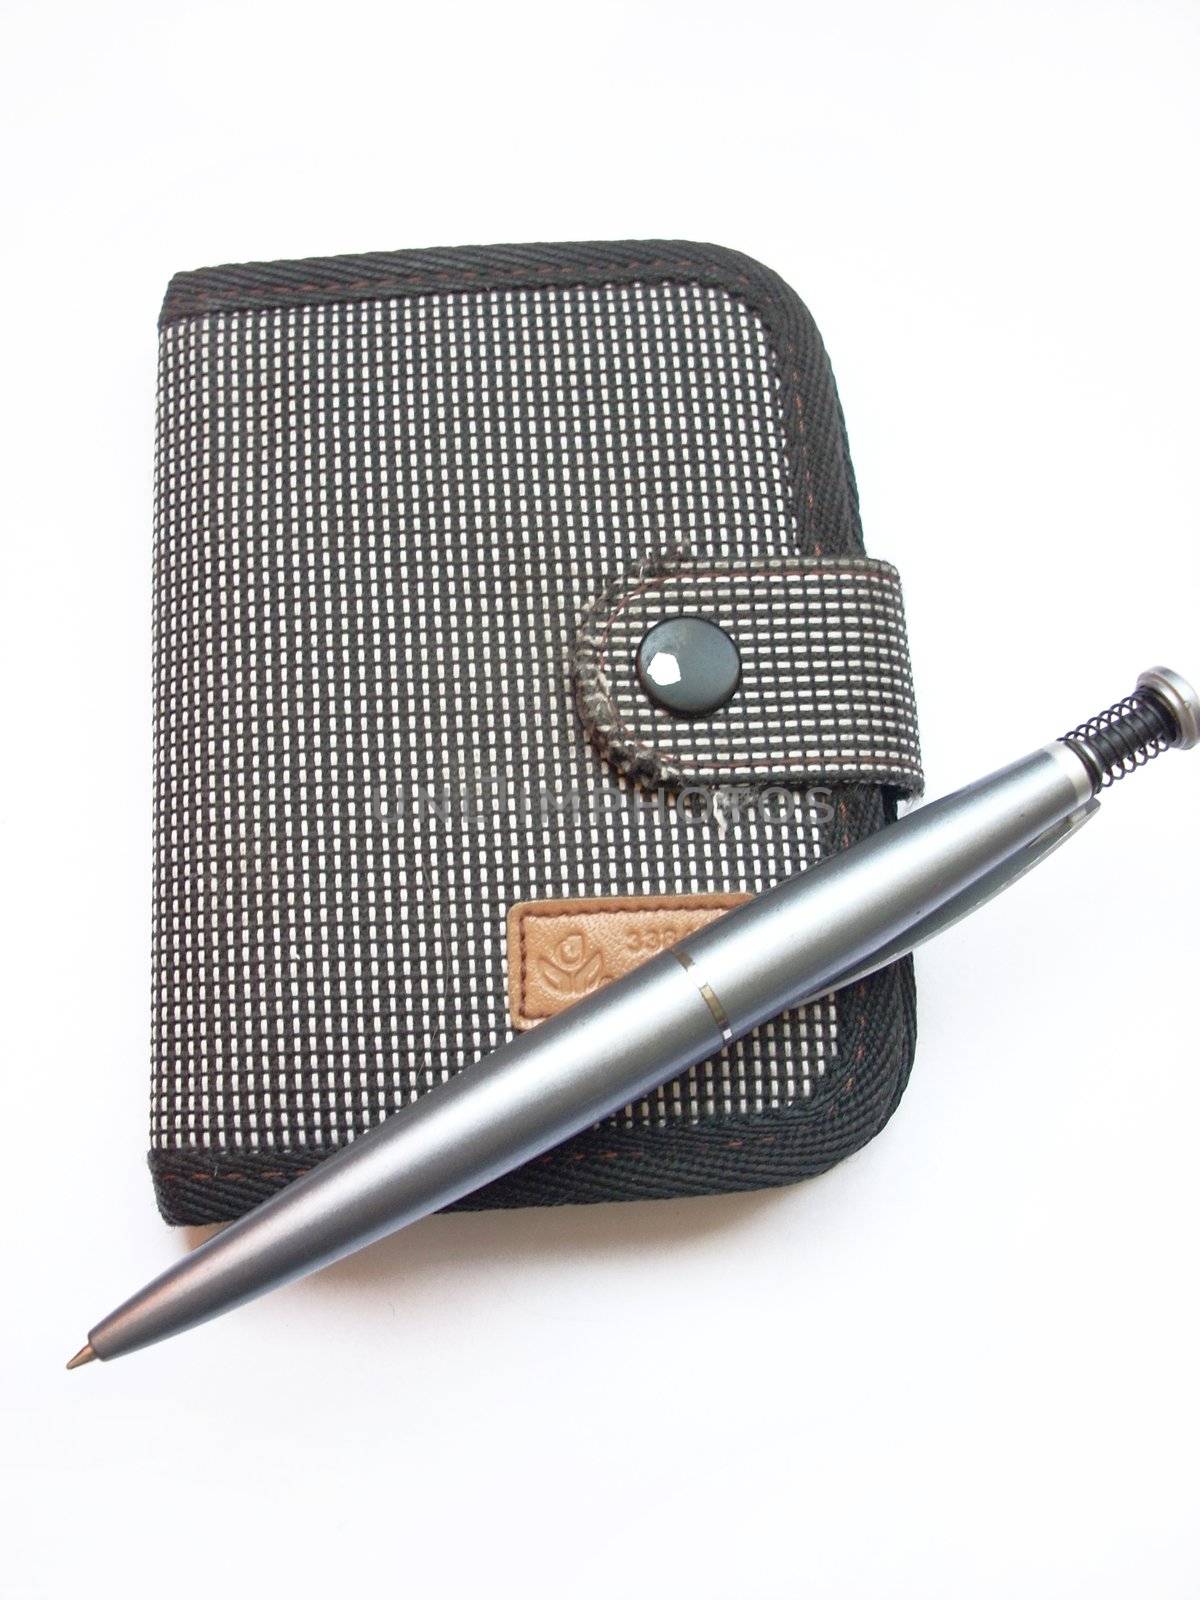 A photograph of ballpoint and writing-pad